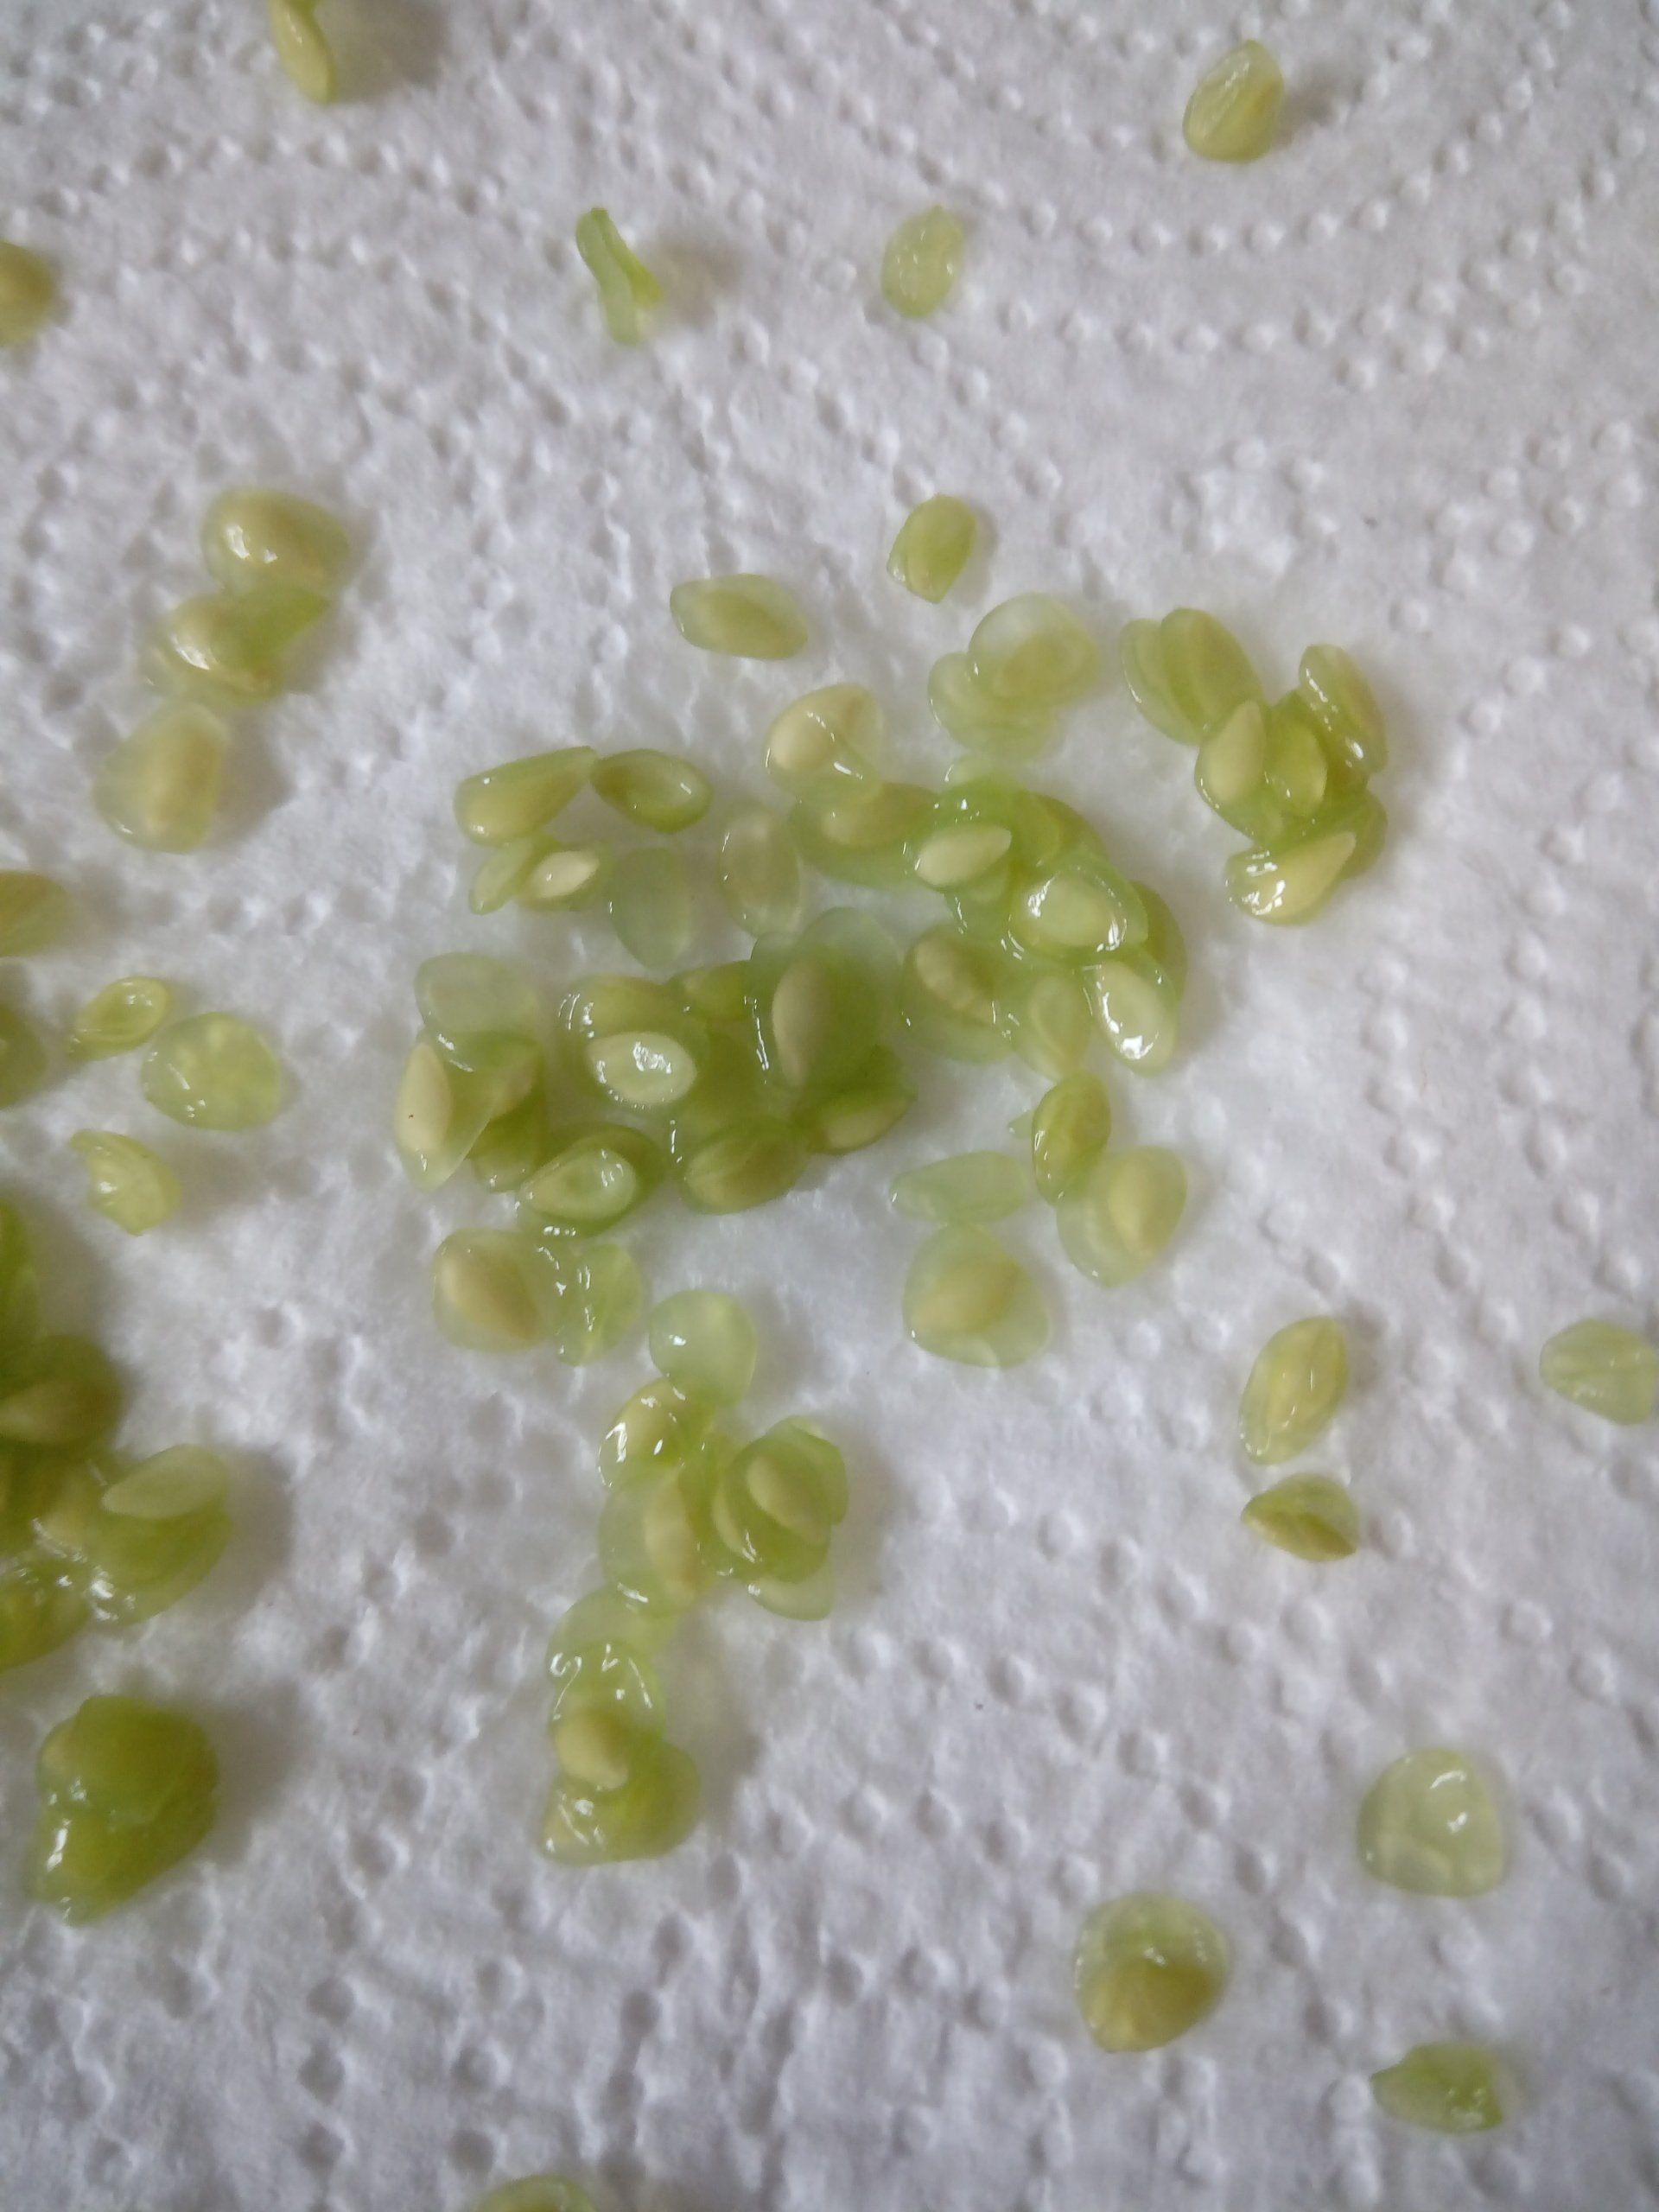 Cucamelon Seeds Drying on a Paper Towel